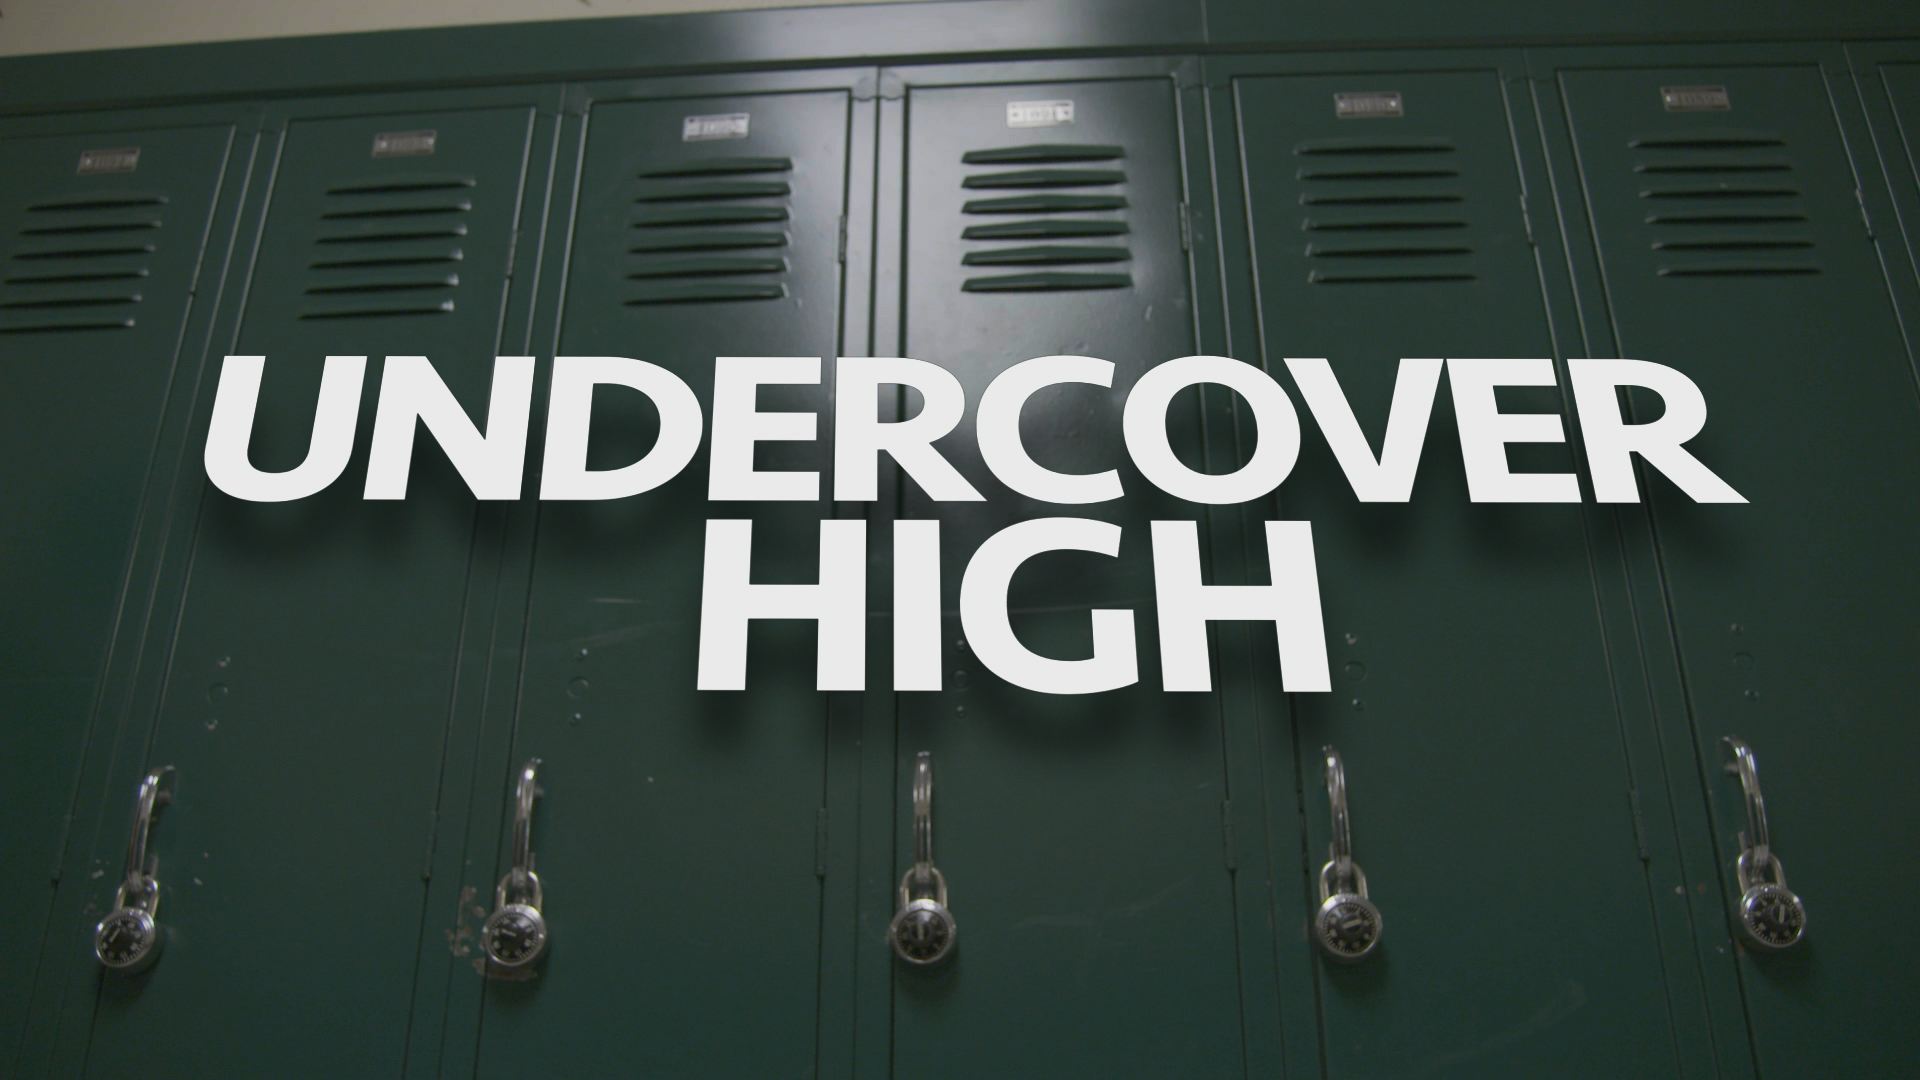 UNDERCOVER HIGH